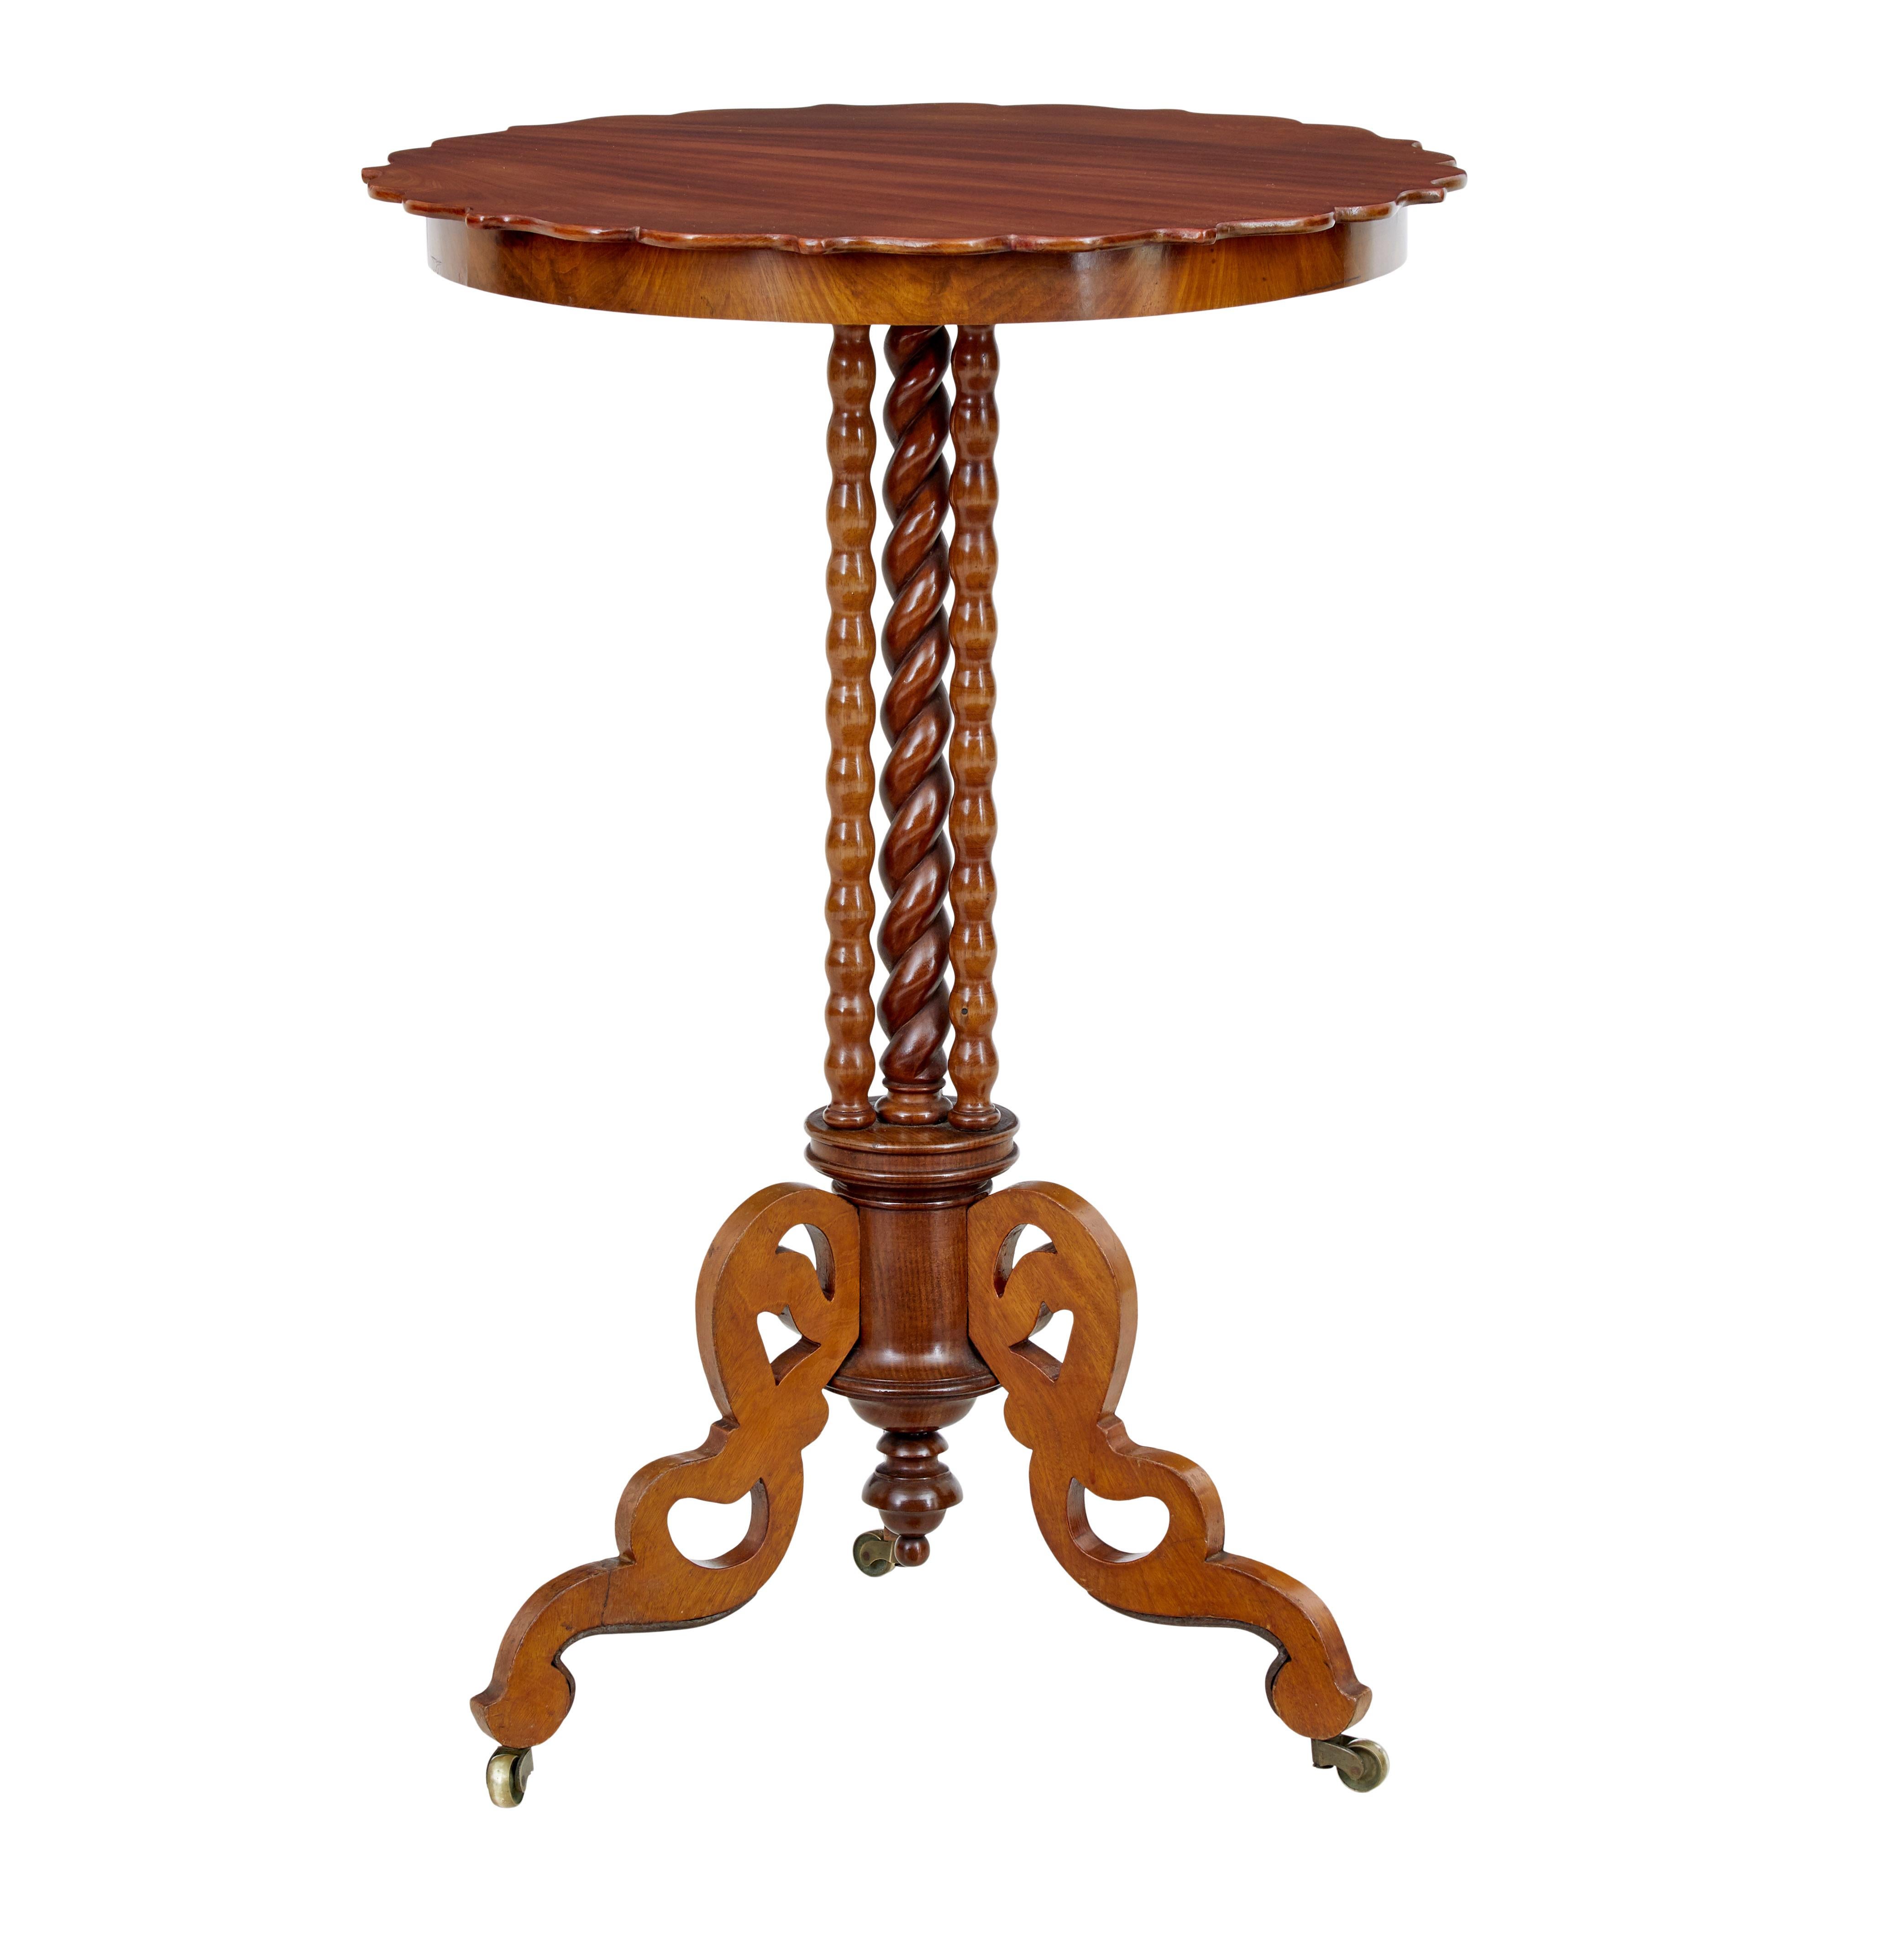 Late 19th century mahogany bobbin turned occasional table circa 1890.

Scalloped shaped circular top, which sits on a stem of 1 barley twist stem surrounded by a further 3 barley twist supports, all supported on 3 fret cut scrolling legs and brass